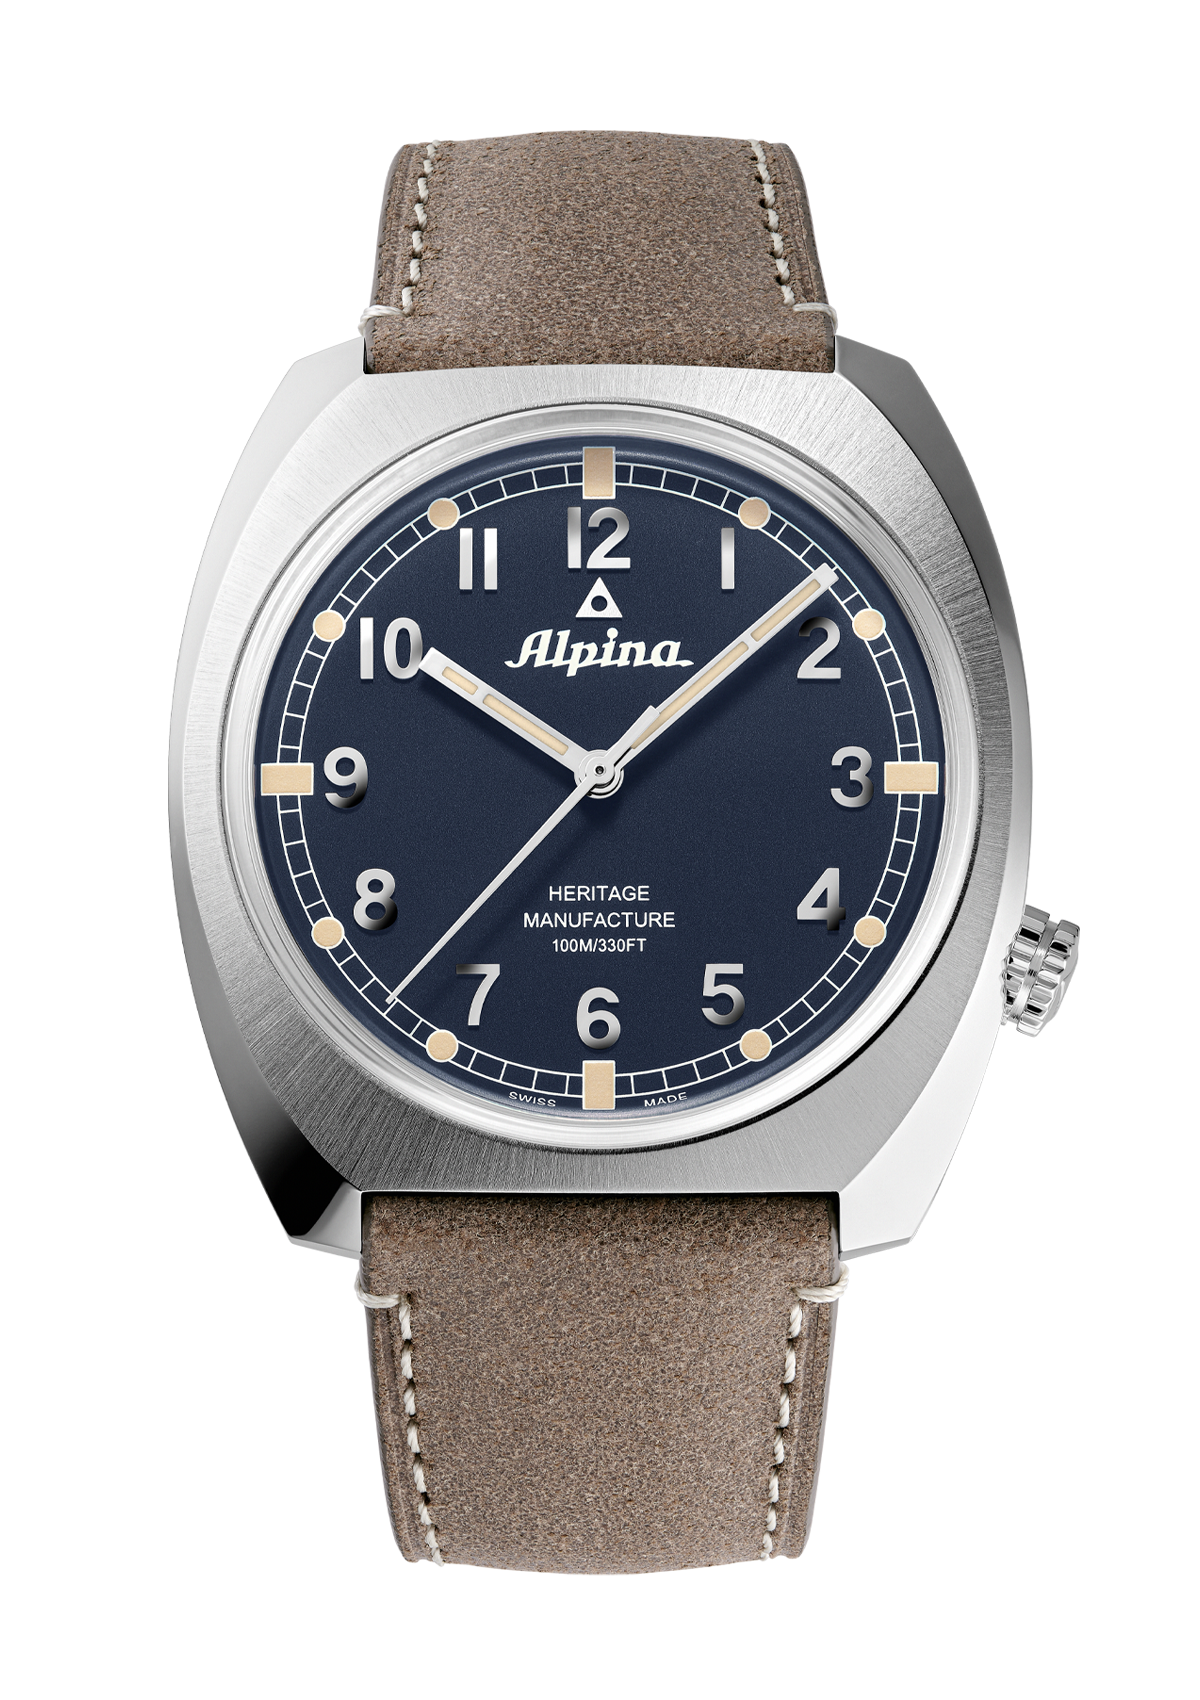 The “Bumper” is Back: Alpina Adds Two Limited Editions to Startimer Pilot Heritage Manufacture Collection